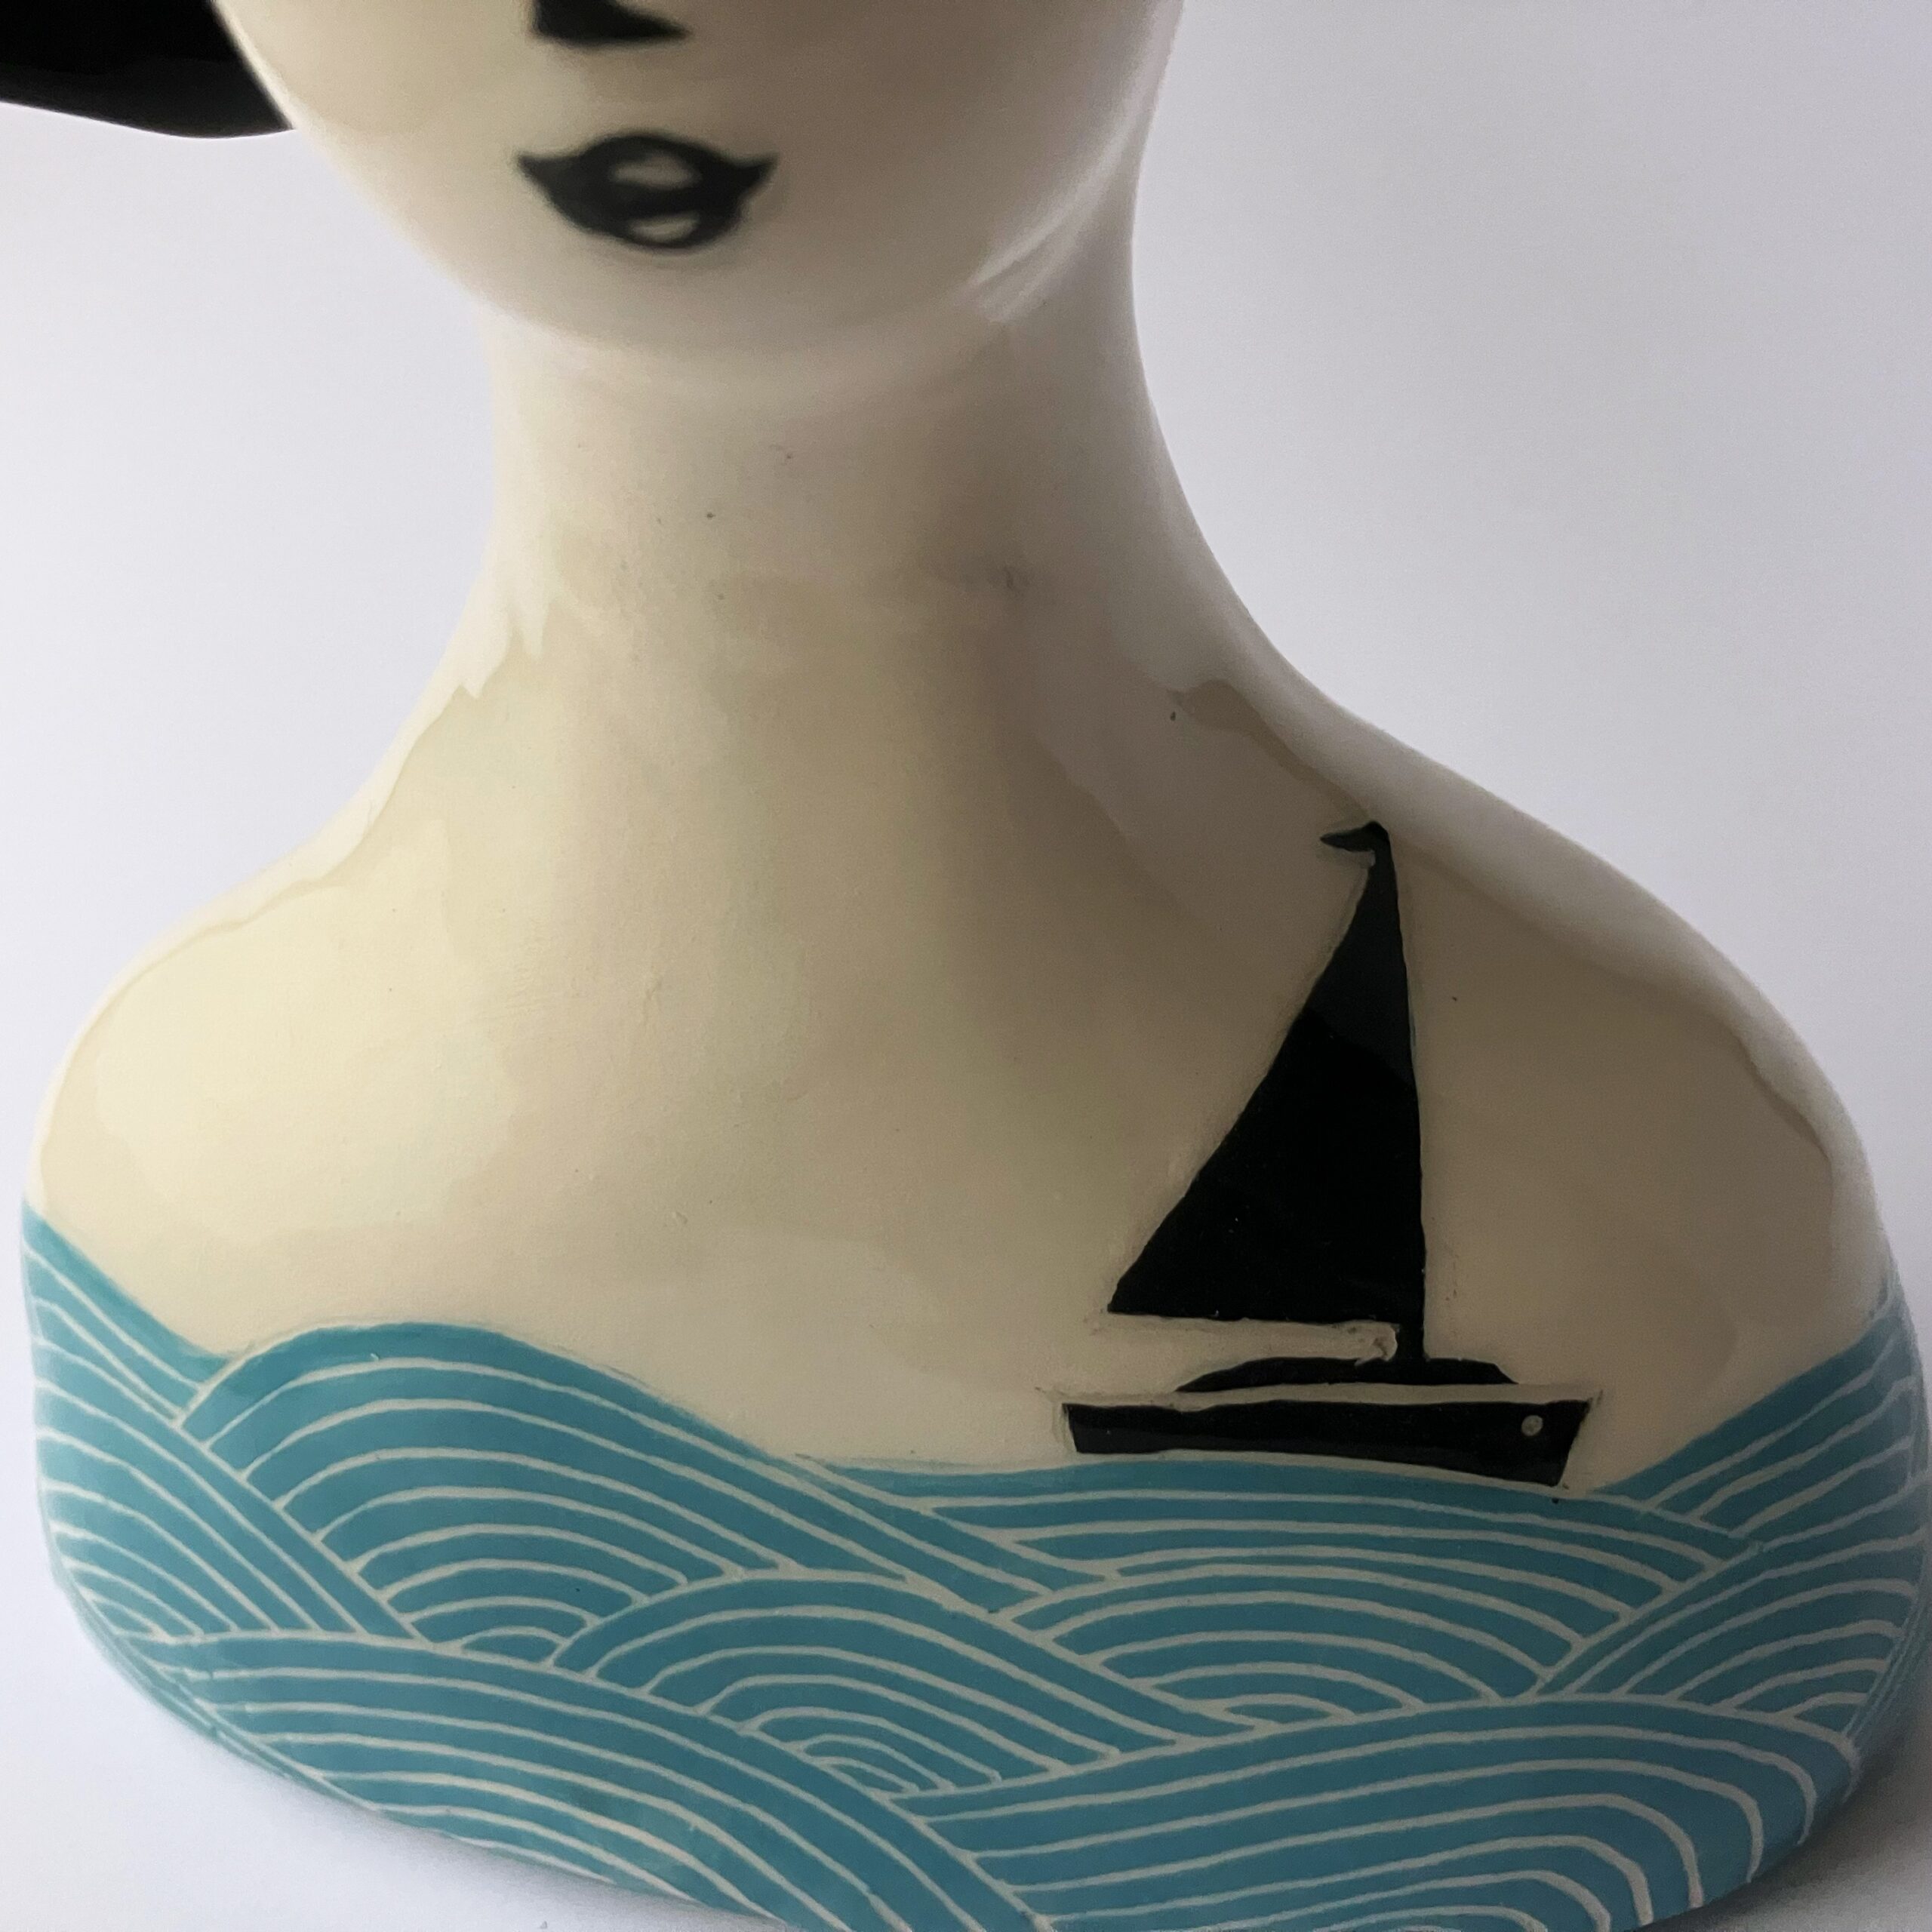 Small wind rose ”Levante” with boat and blue waves